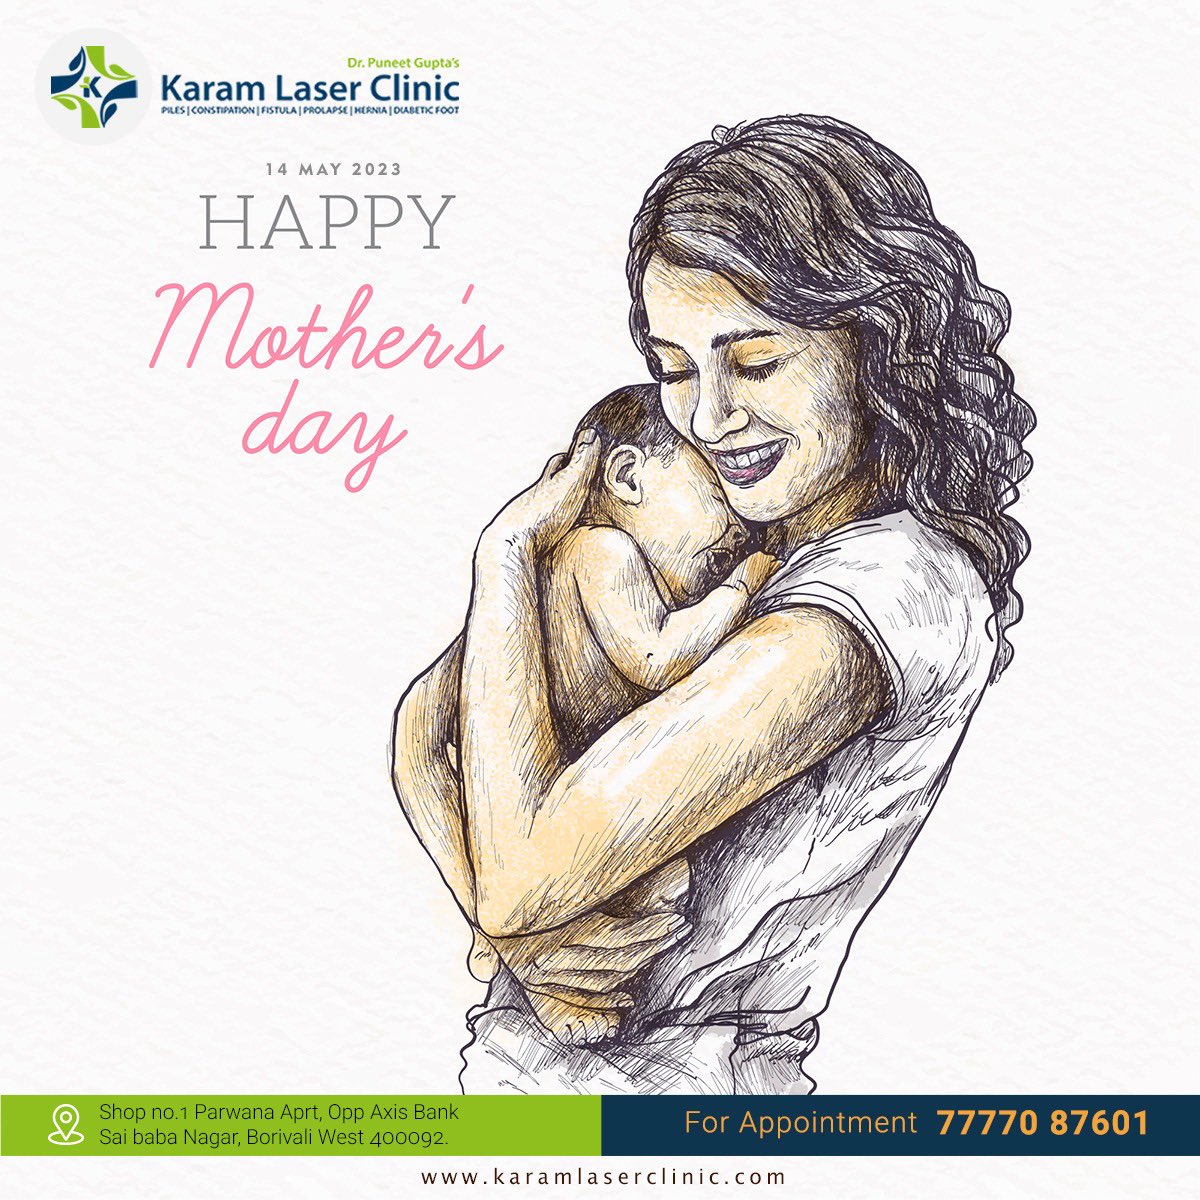 Happy Mother’s Day.

#Mothersday2023 #mothers #motherslove #motherspride #mothercare